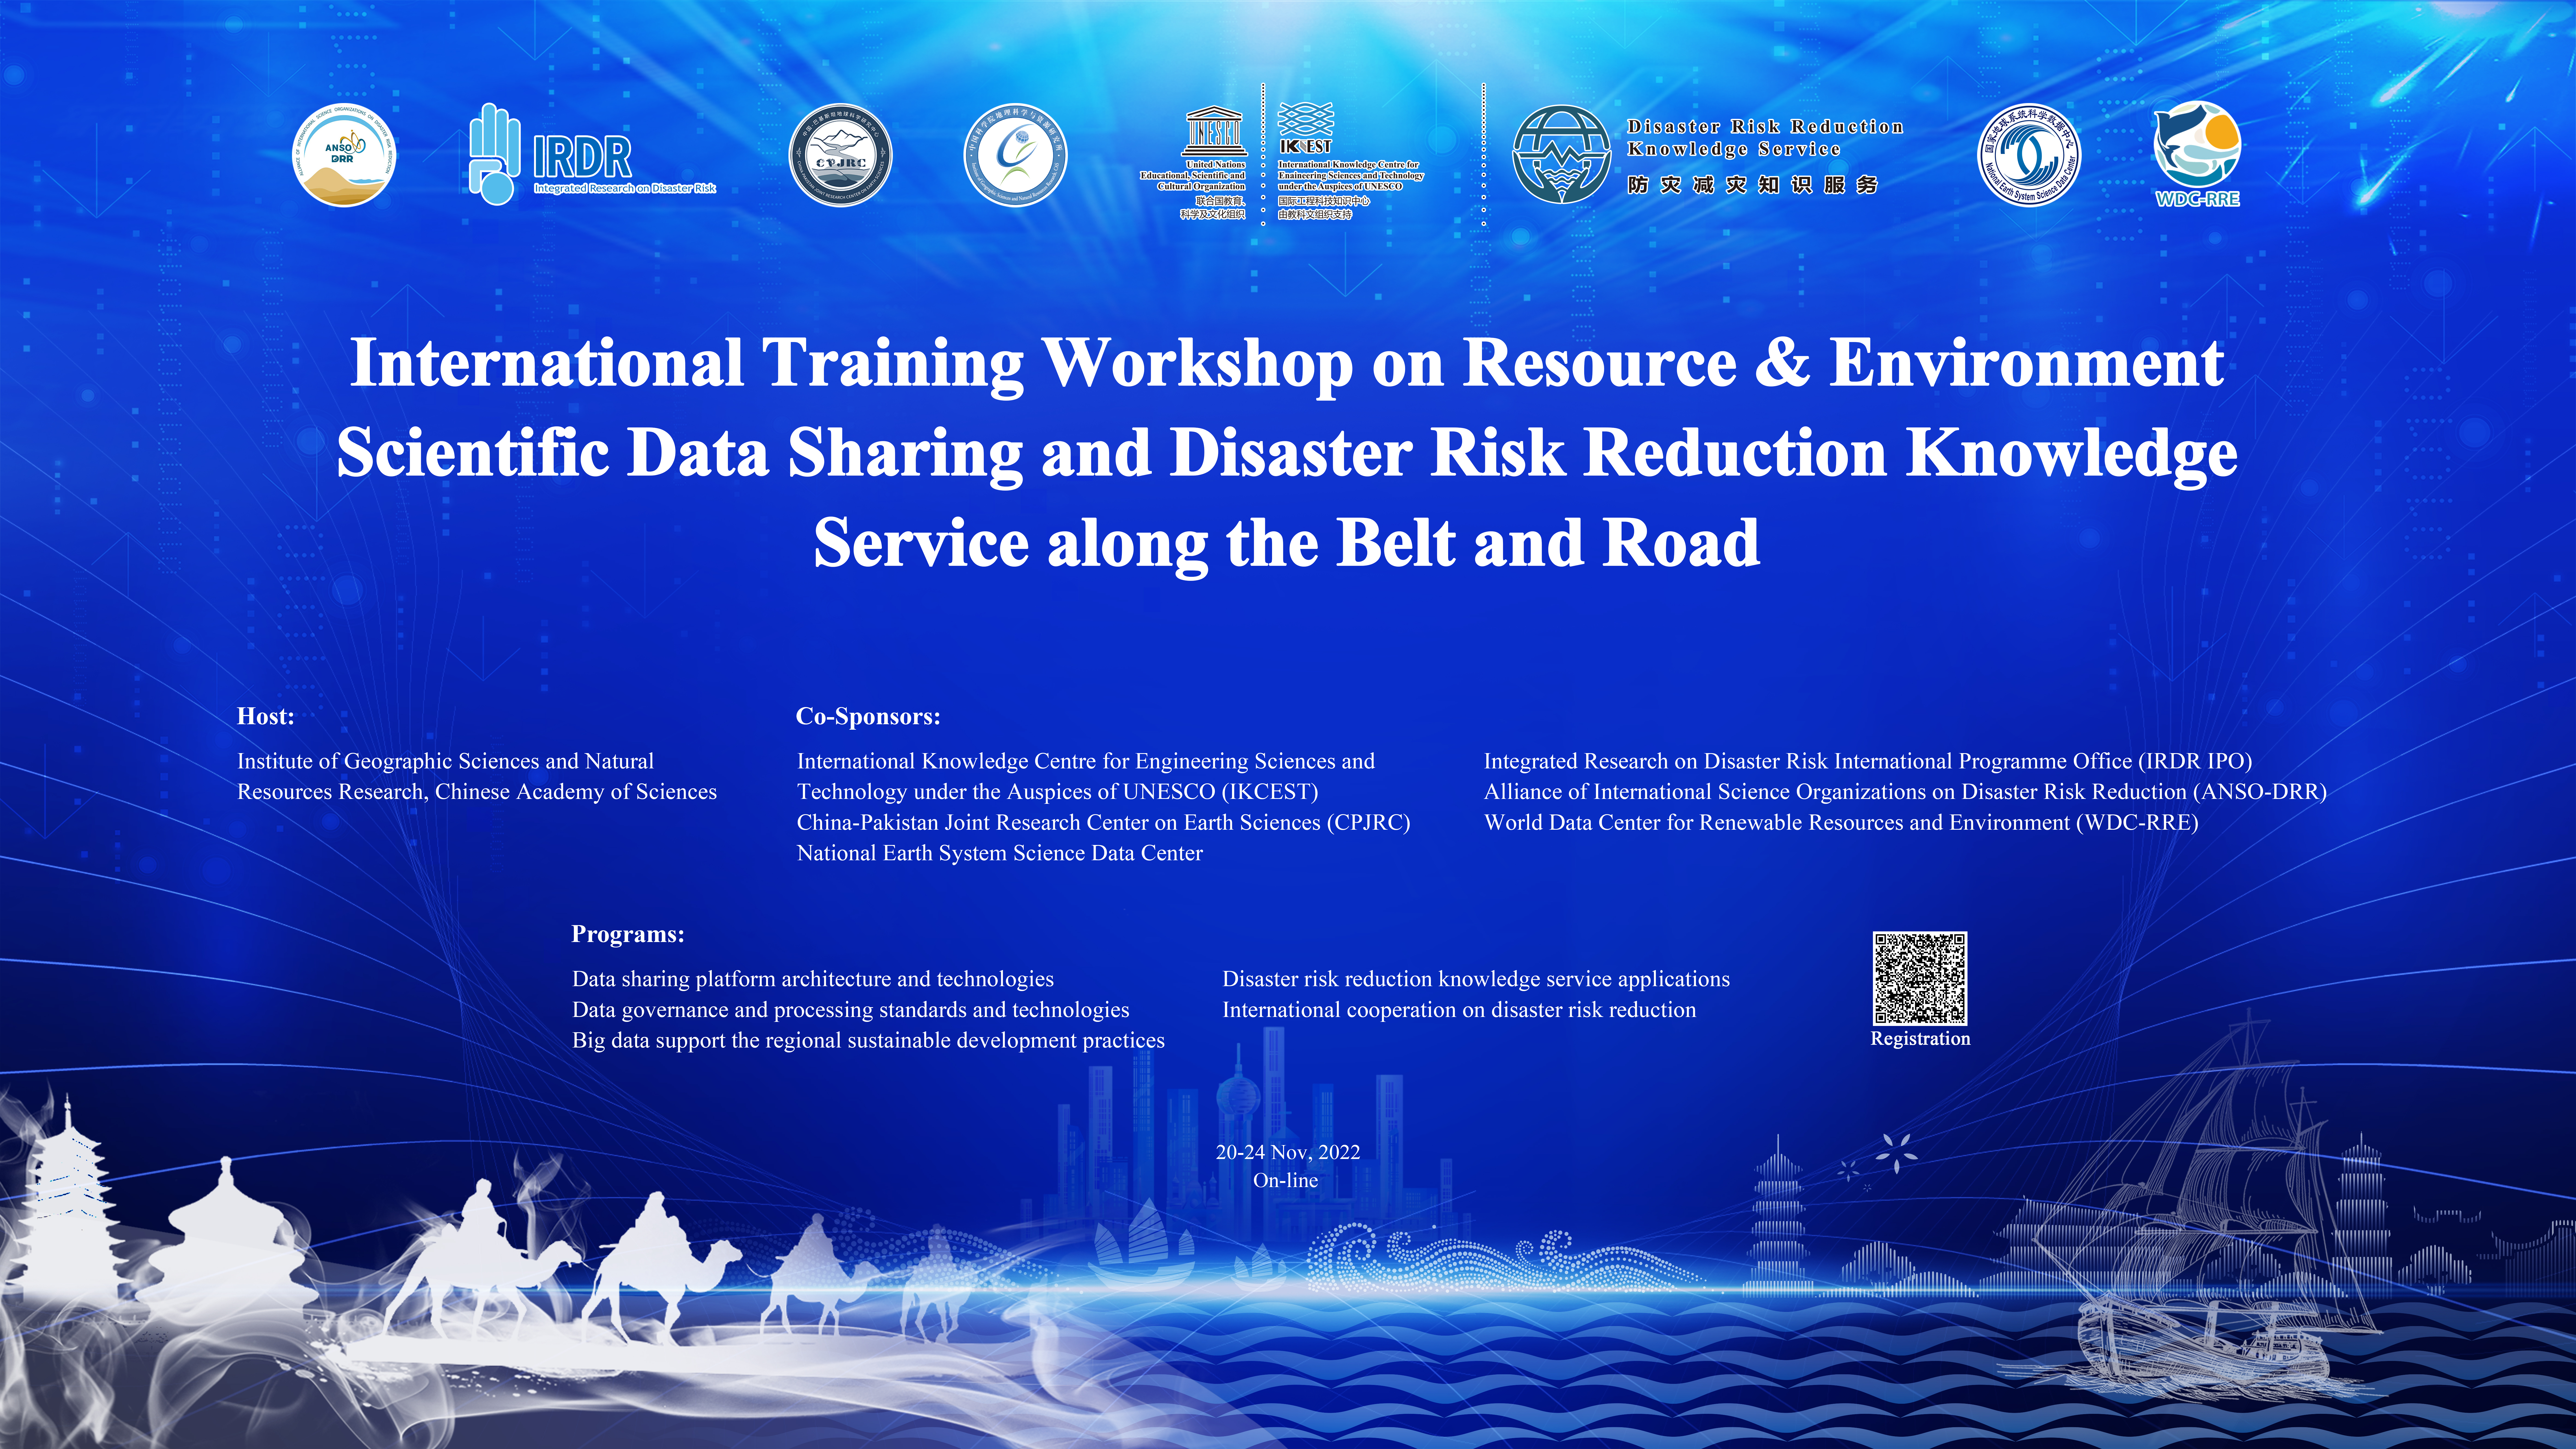 International Training Workshop on Resource & Environment Scientific Data Sharing and Disaster Risk Reduction Knowledge Service along the Belt and Road